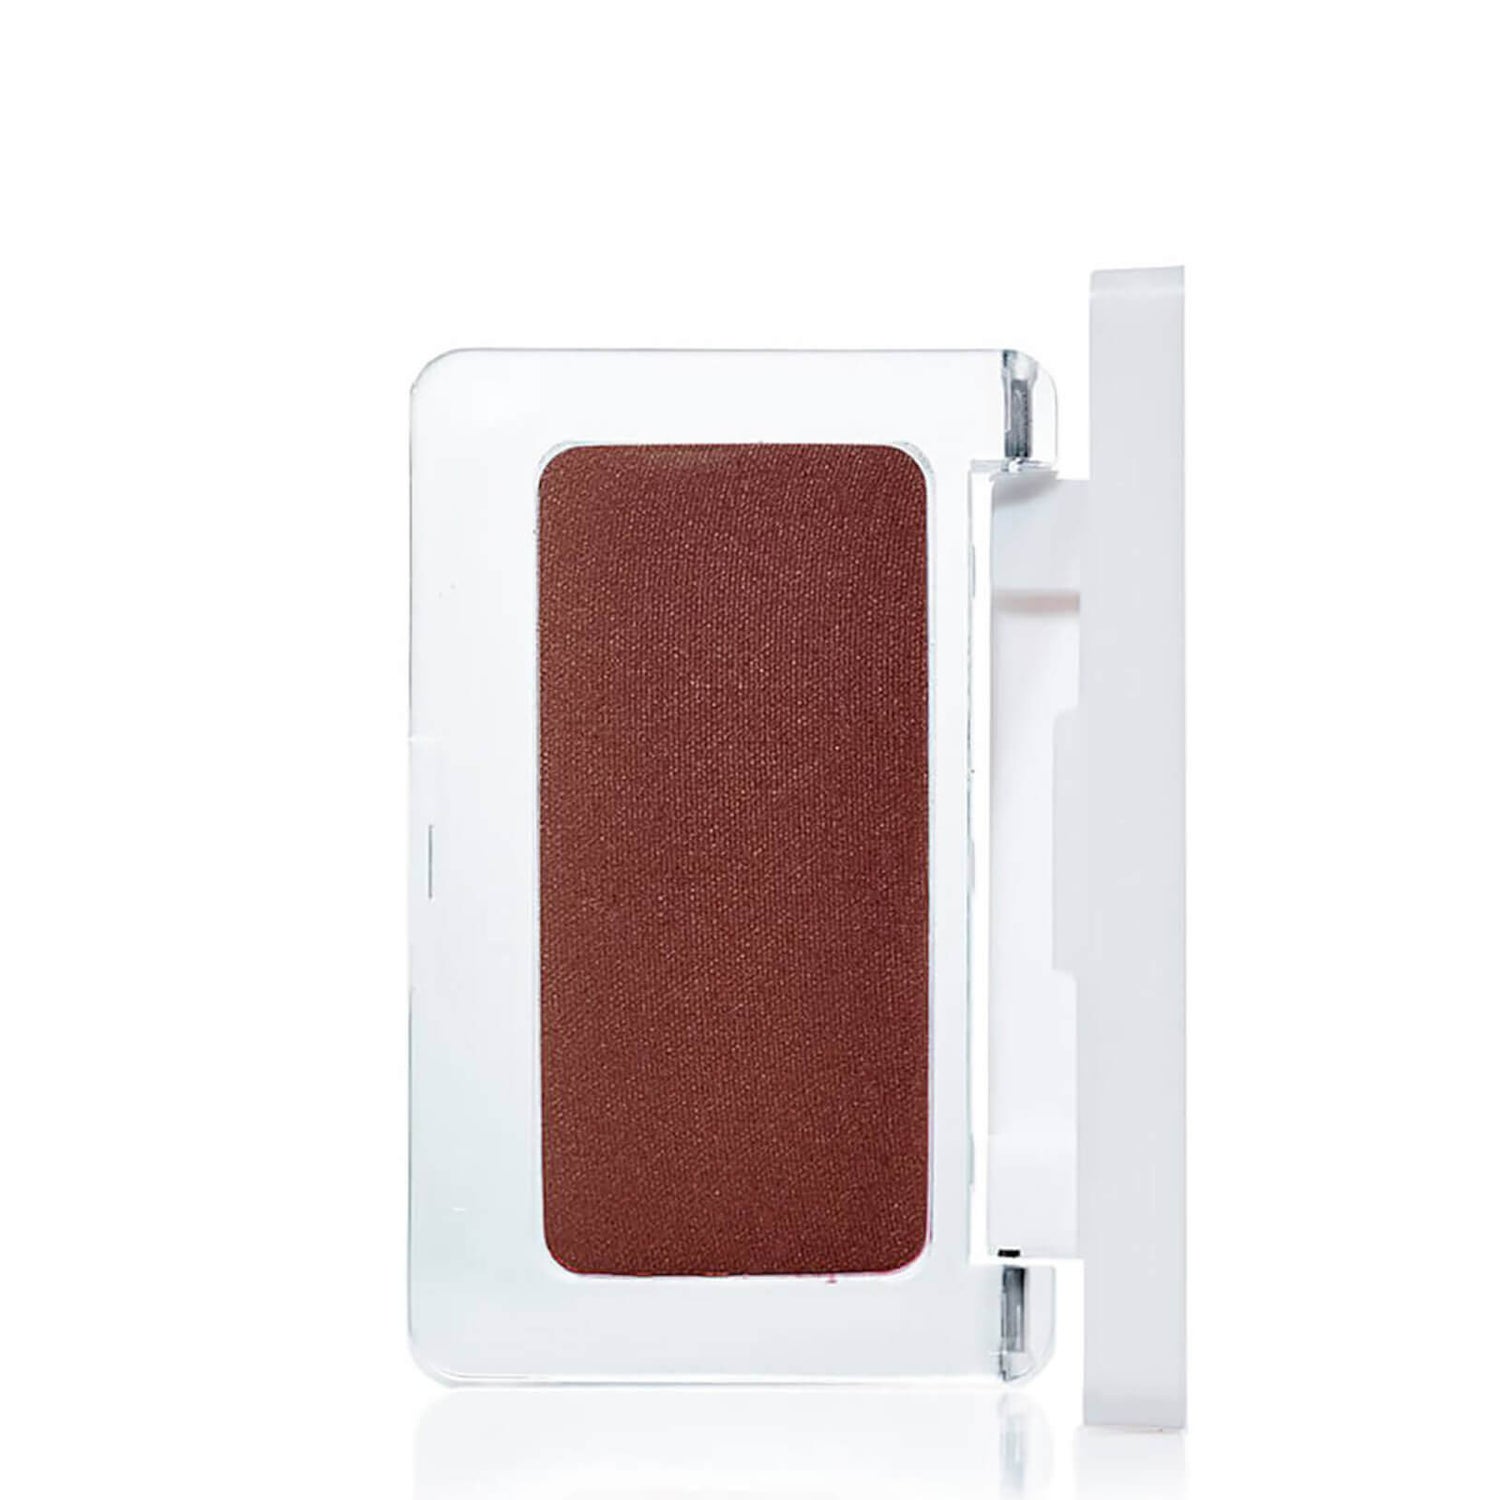 RMS Beauty Pressed Blush - Moon Cry (0.17 oz.)